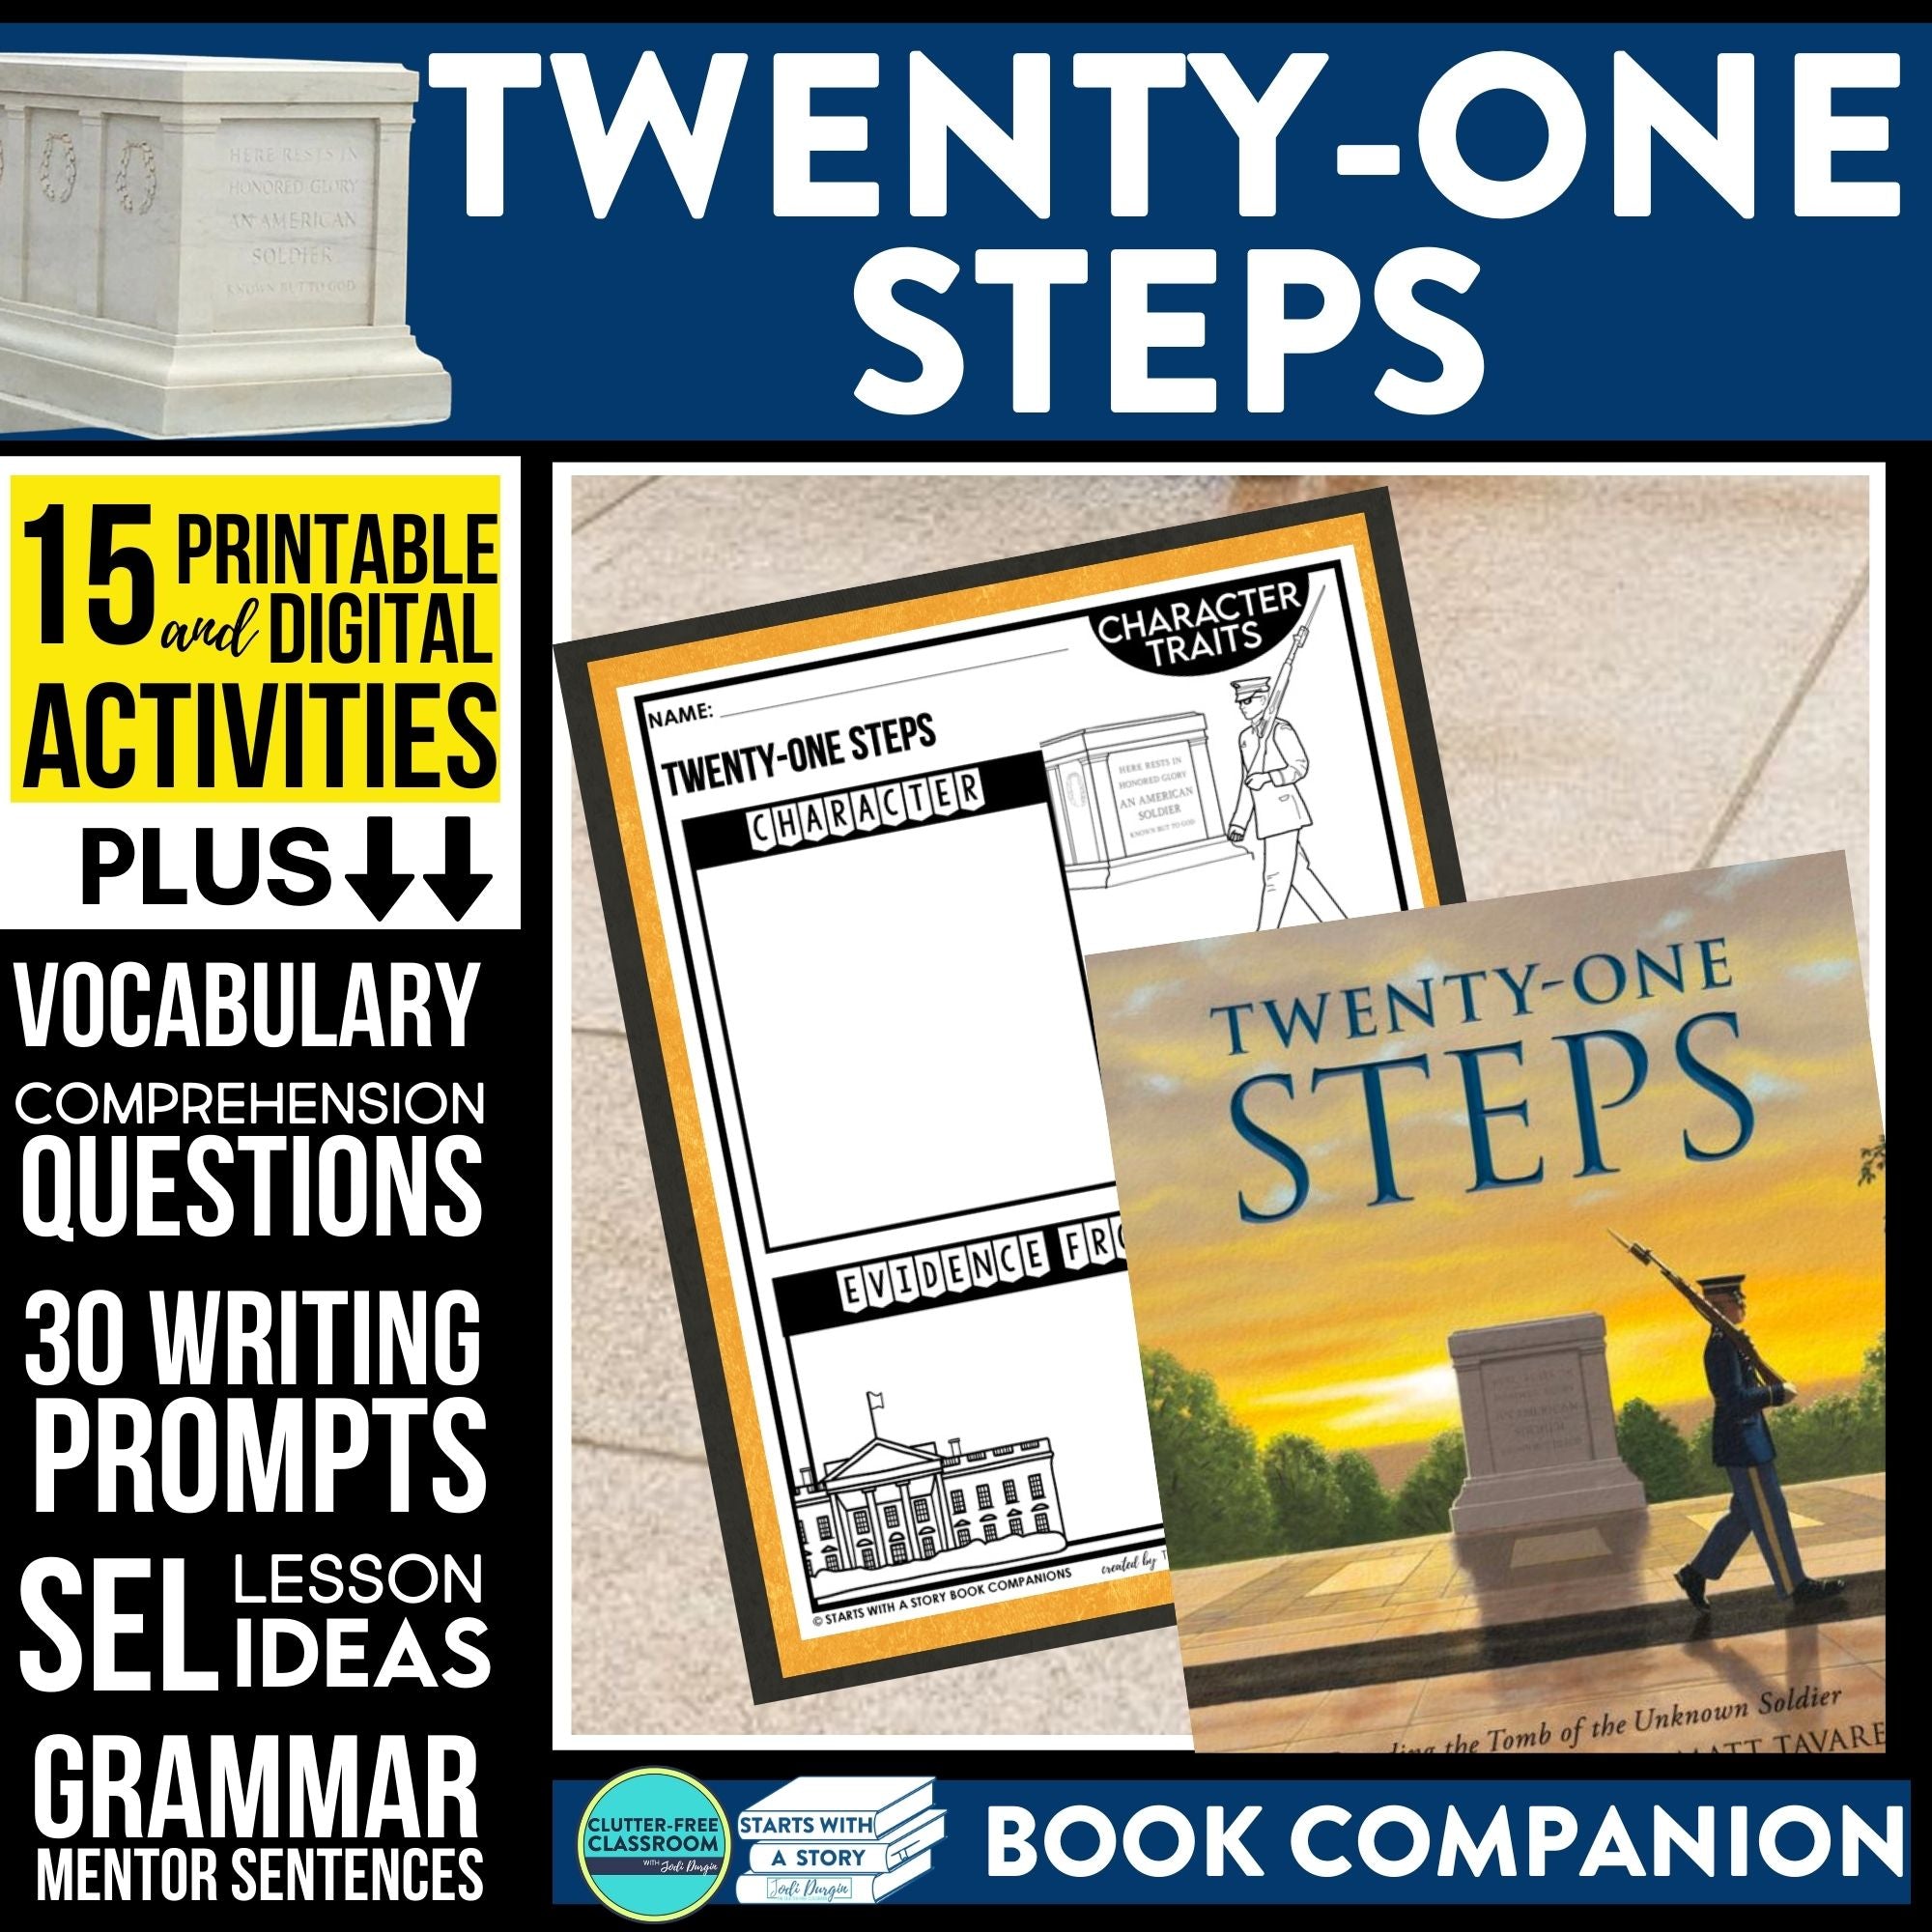 TWENTY-ONE STEPS activities and lesson plan ideas